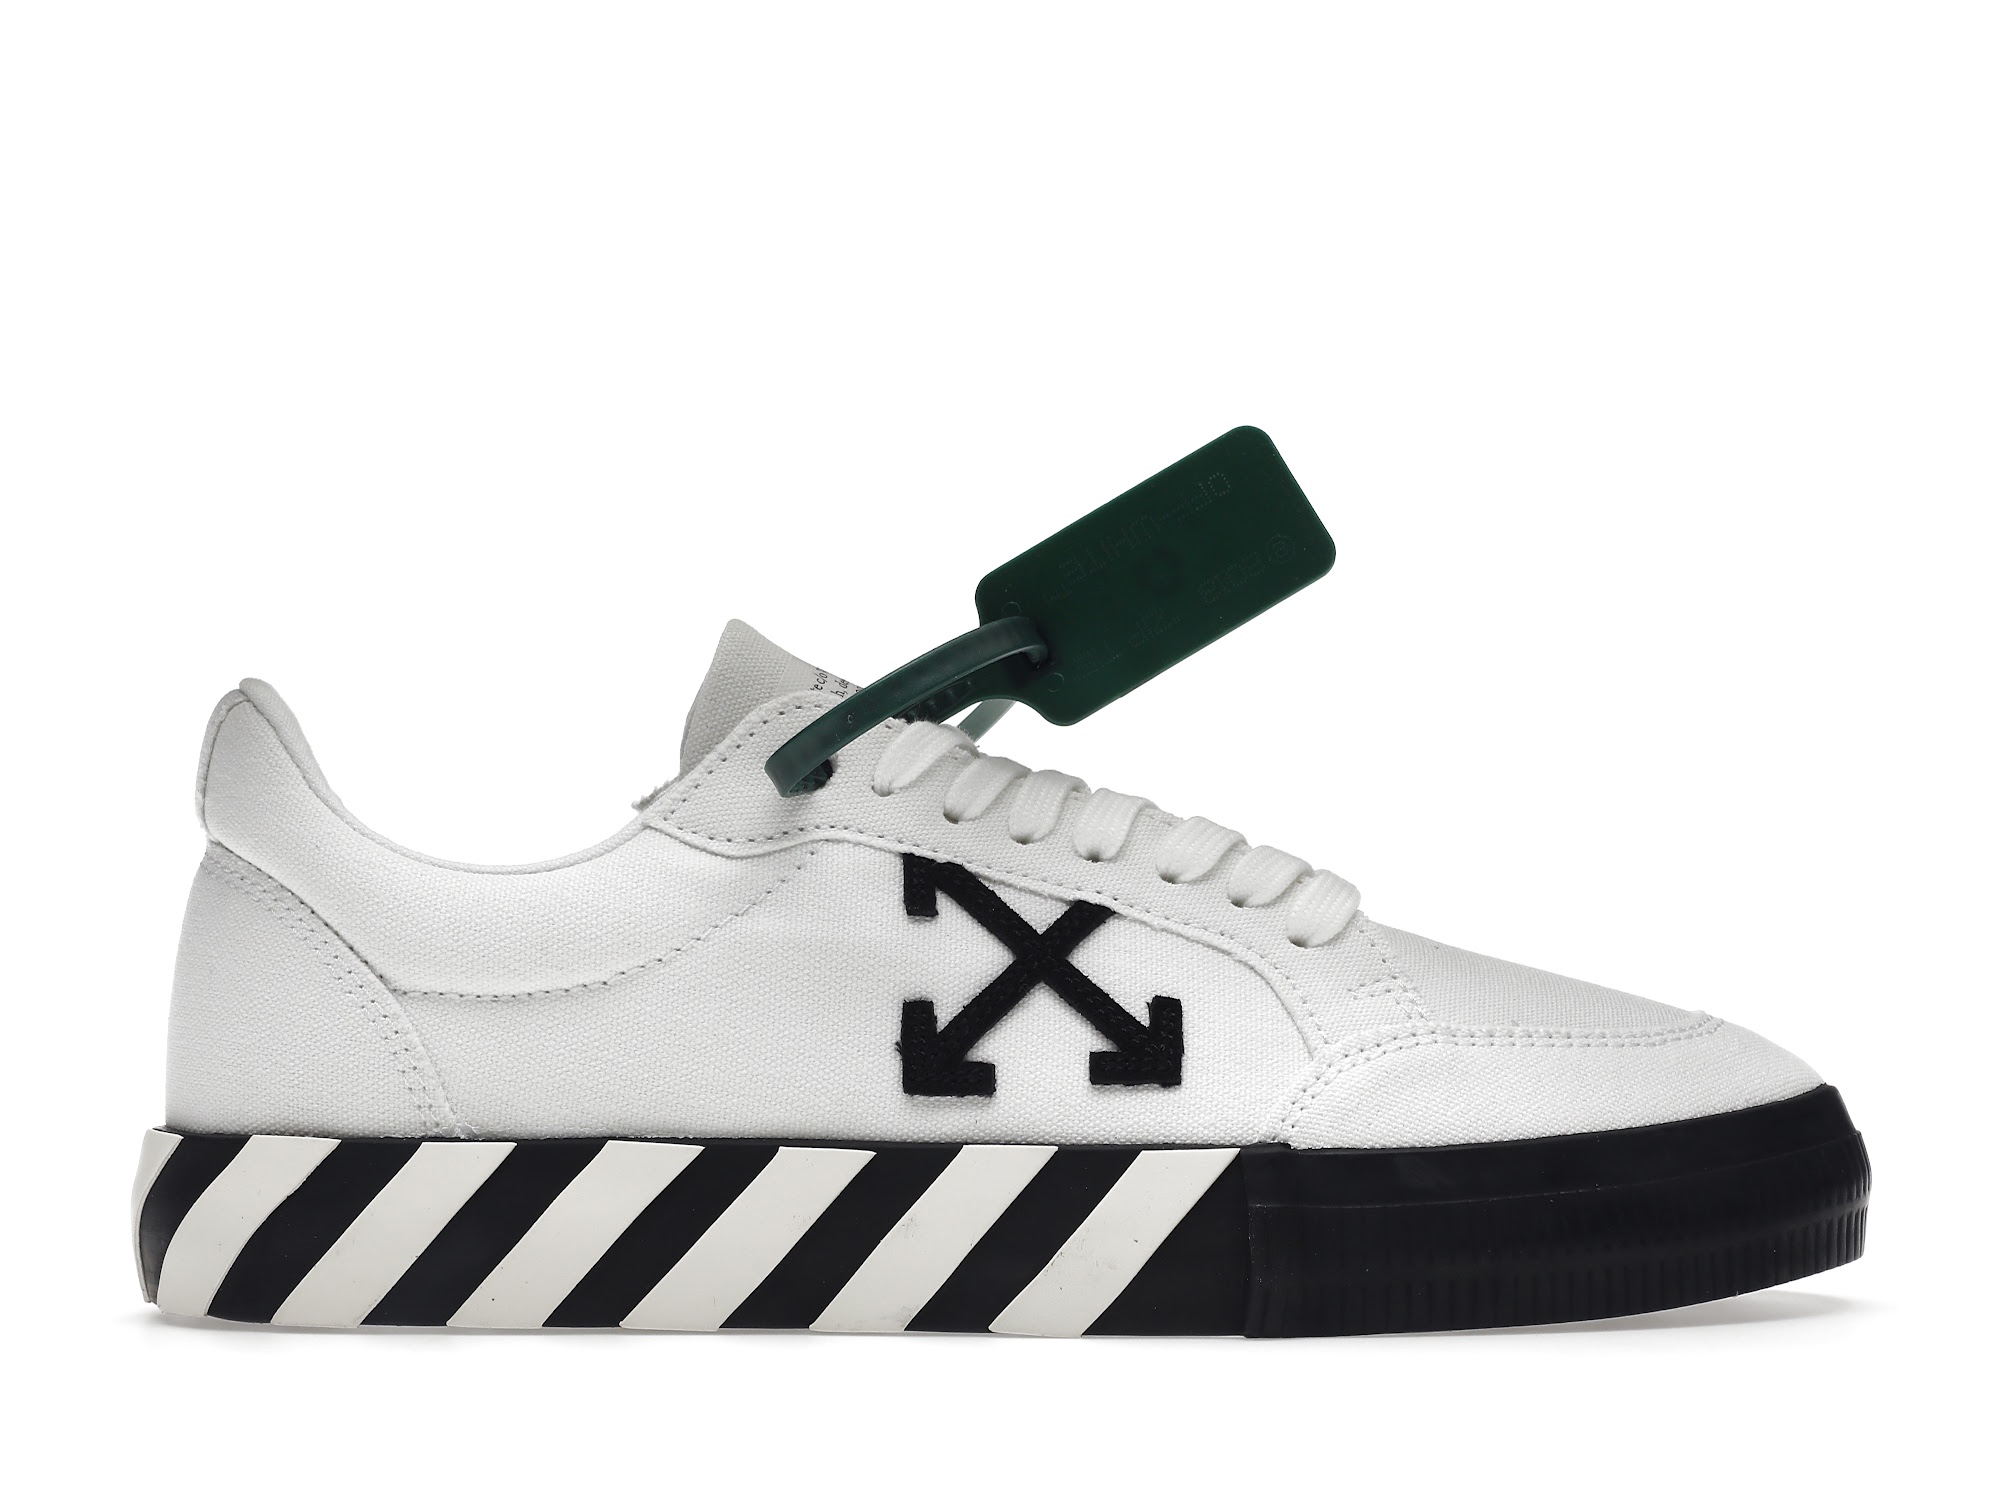 OFF-WHITE OOO Low Out Of Office White Green Men's - Sneakers - US